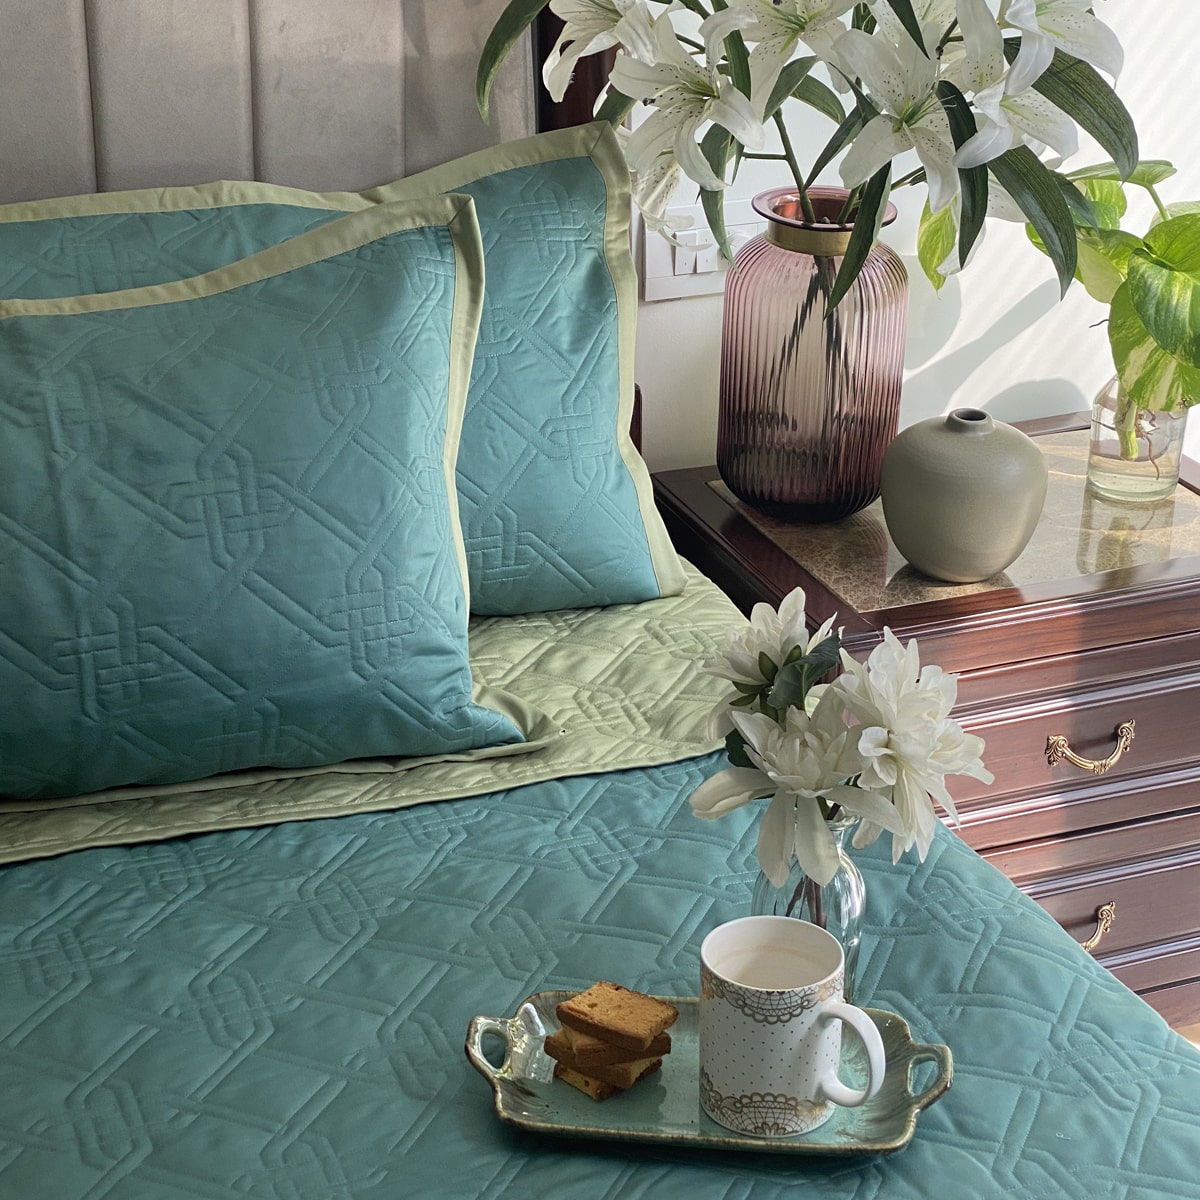 Quilted Turquoise and Lime Green Gizmo Reversible Bedspread